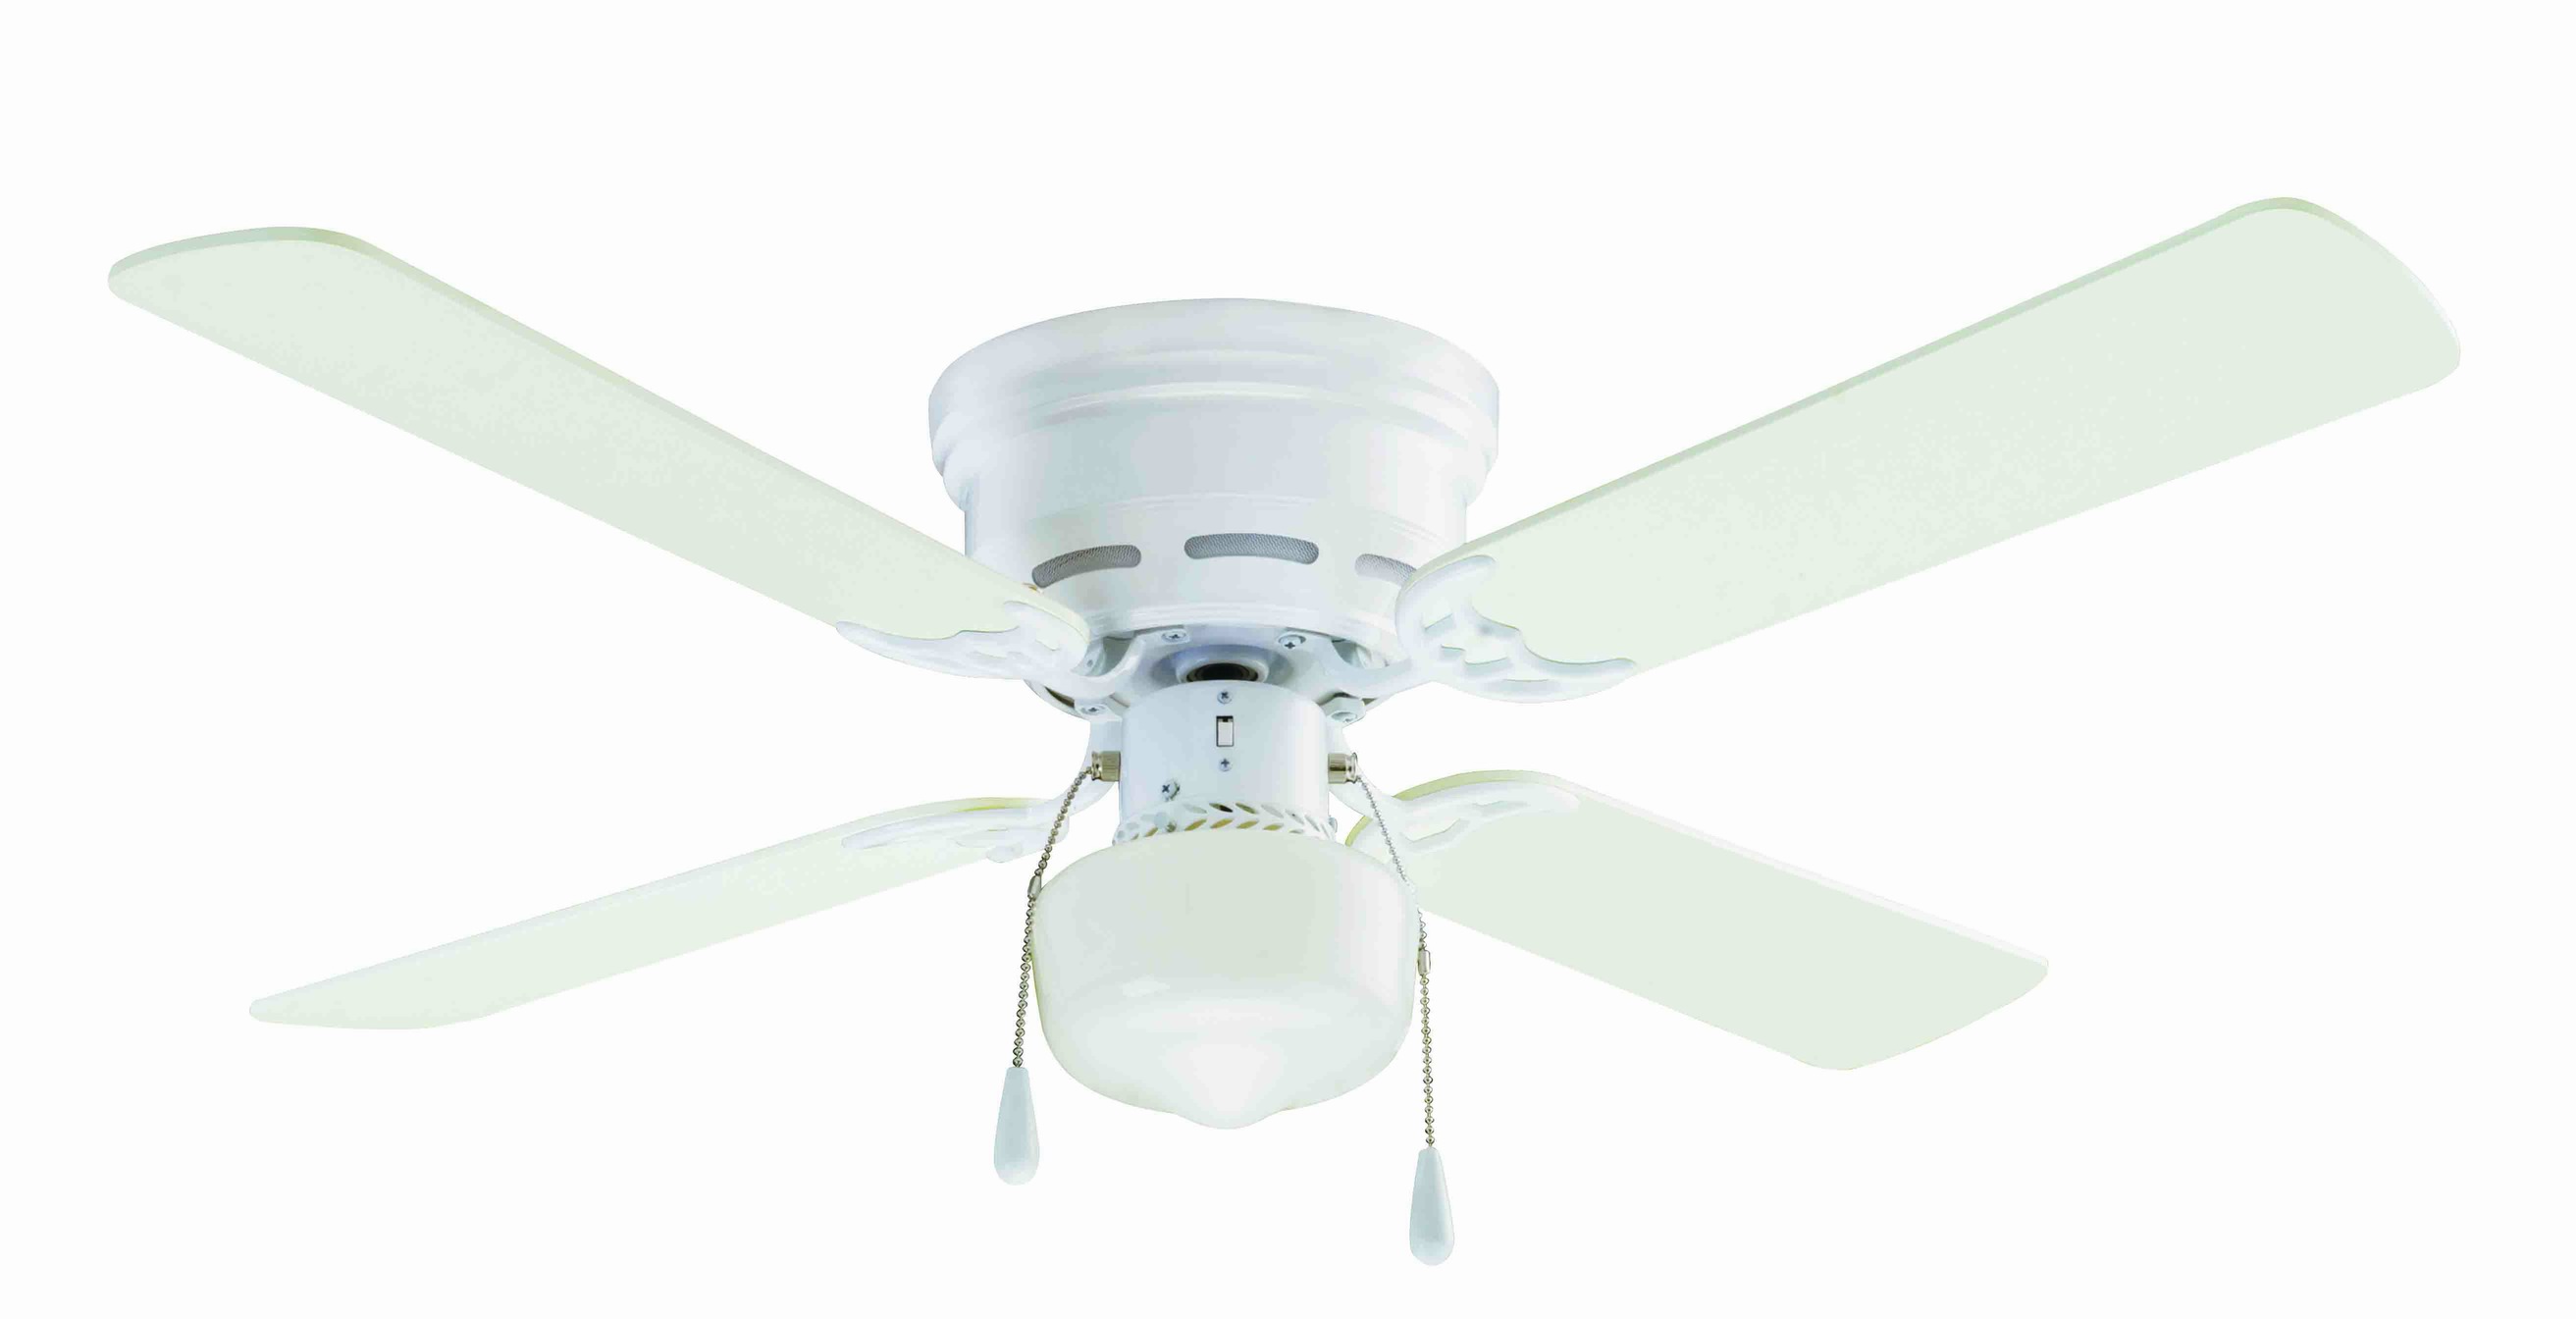 42" Mainstays Hugger Indoor Ceiling Fan with Light, White - image 1 of 2